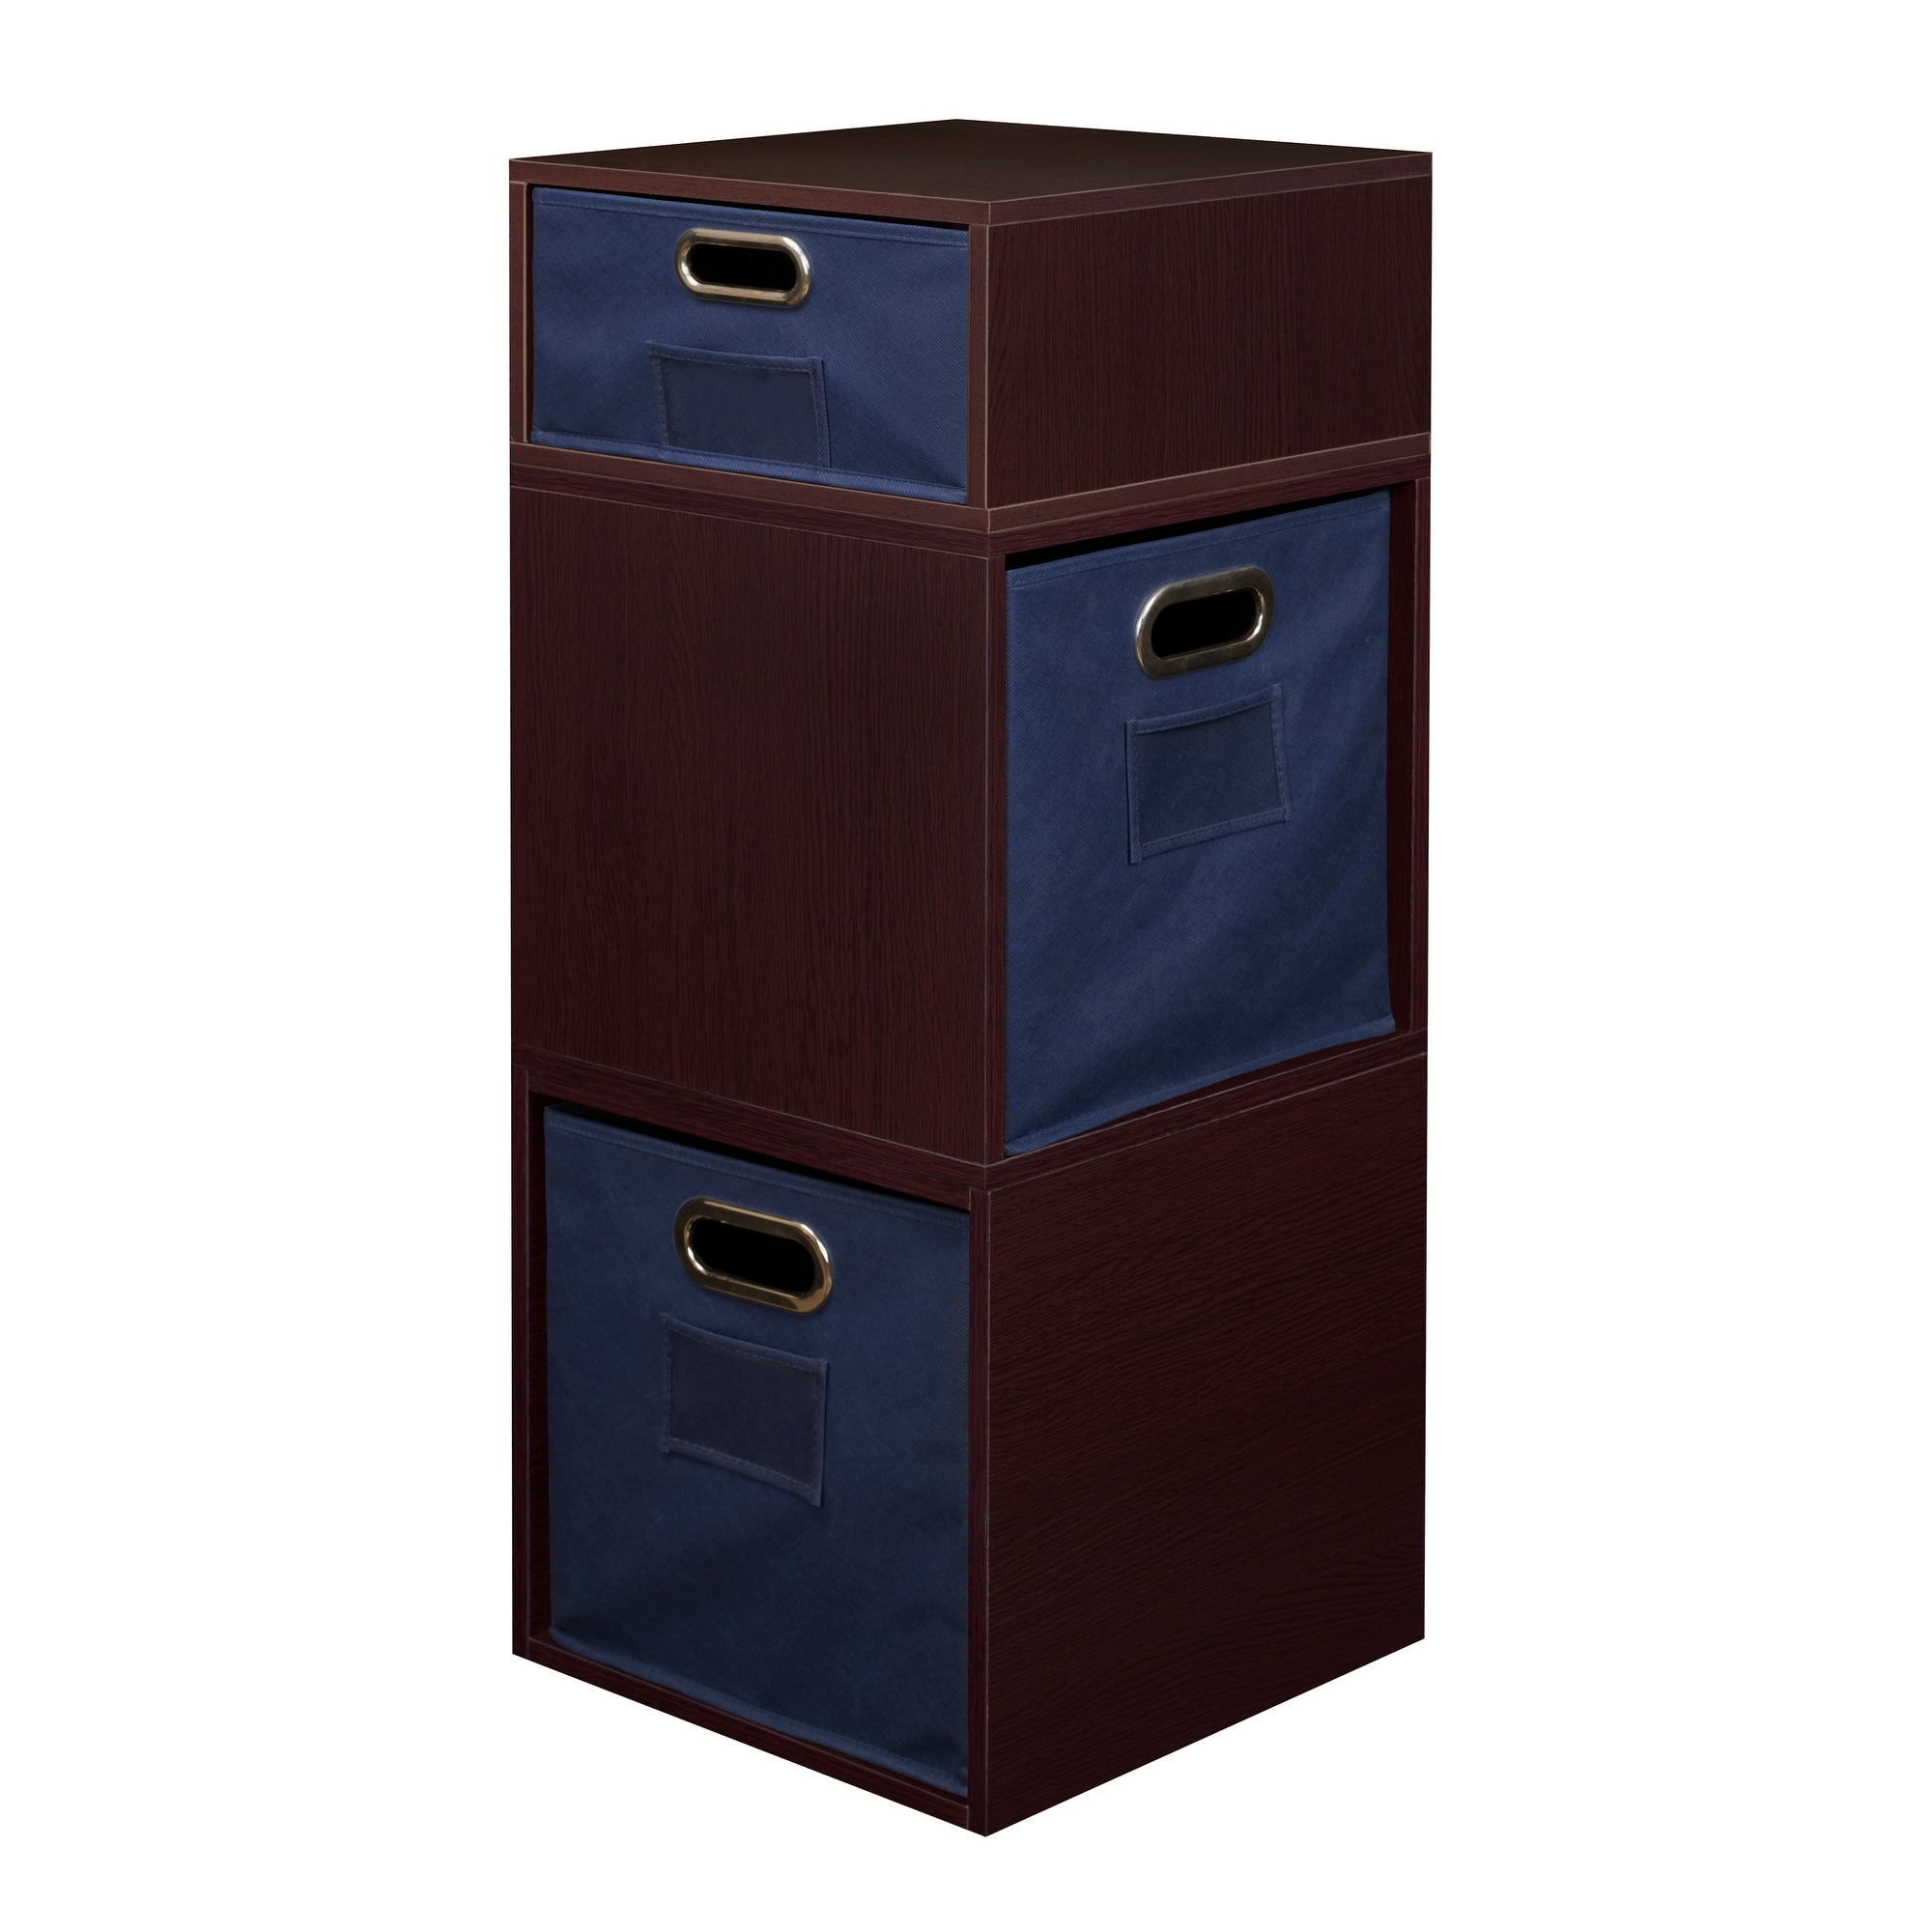 Noble Connect Storage Set- 2 Full Cubes/1 Half Cube with Foldable Storage Bins- Truffle/Blue